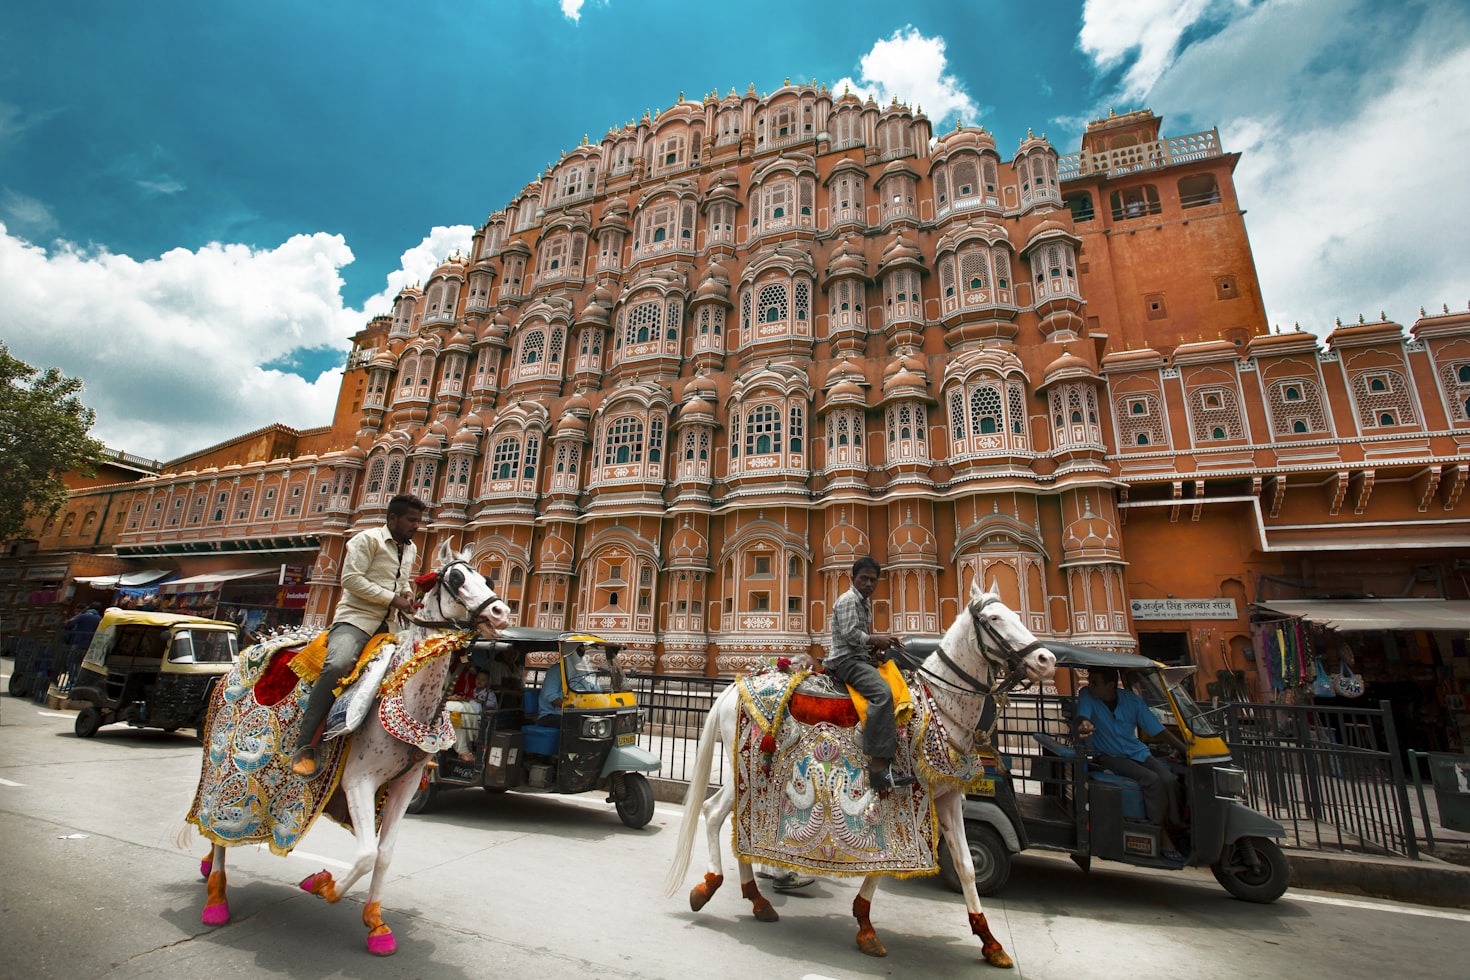 Rajasthan Tourism Department Launches Ambitious Tourism Development Project Across Districts